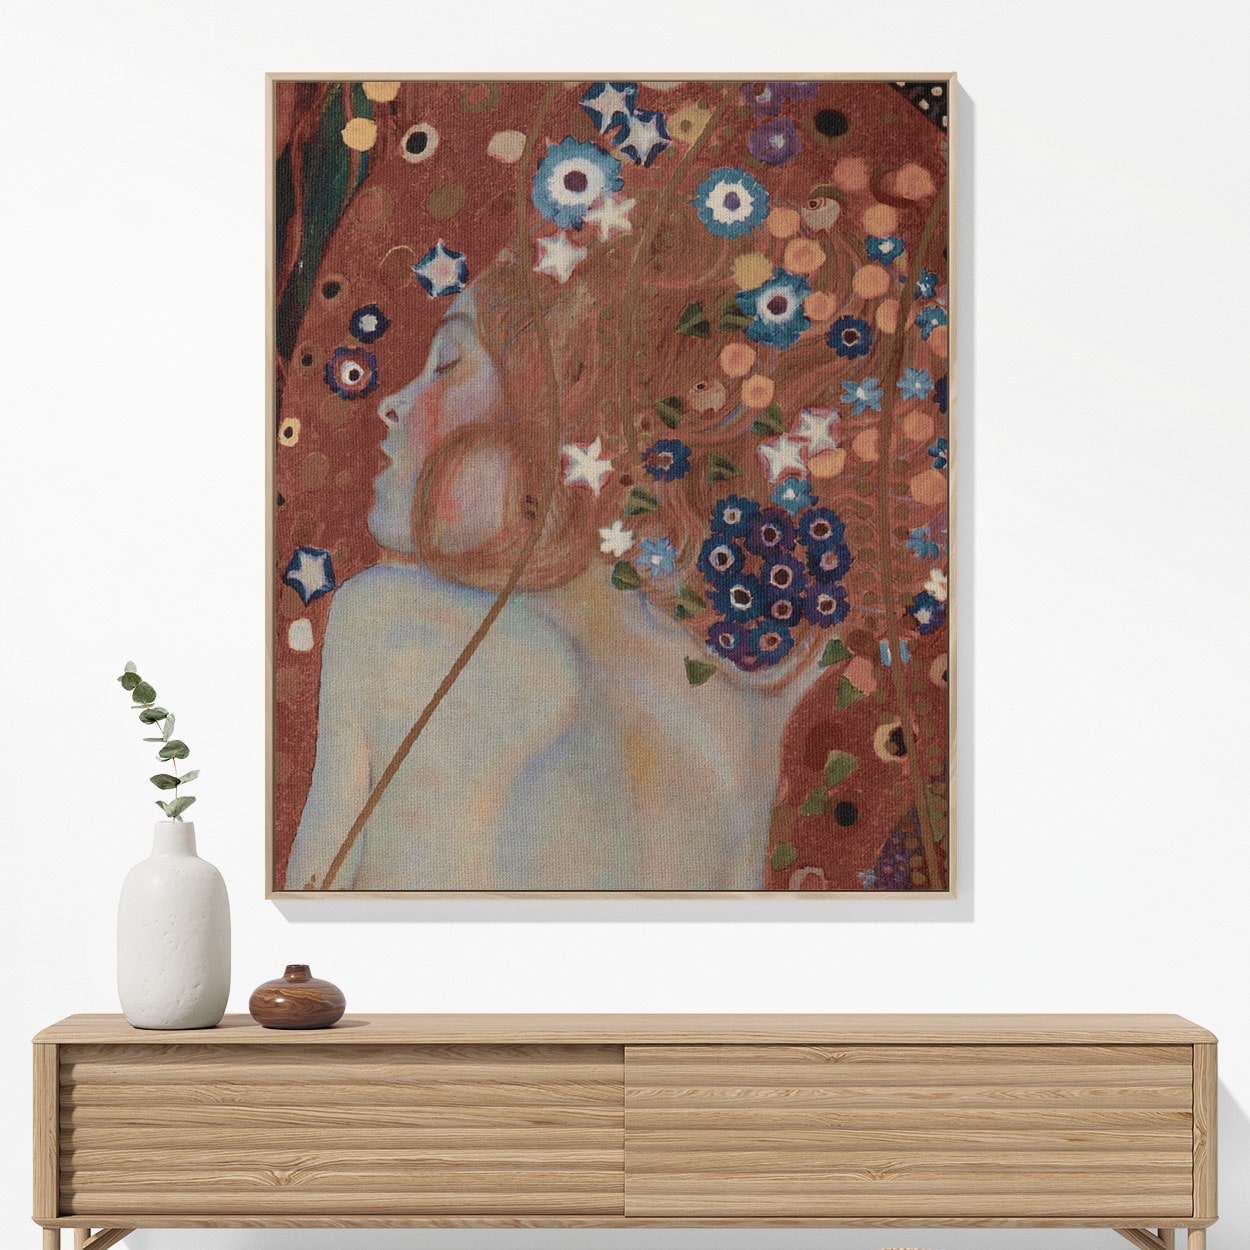 Woman with Flower Hair Woven Blanket Woven Blanket Hanging on a Wall as Framed Wall Art